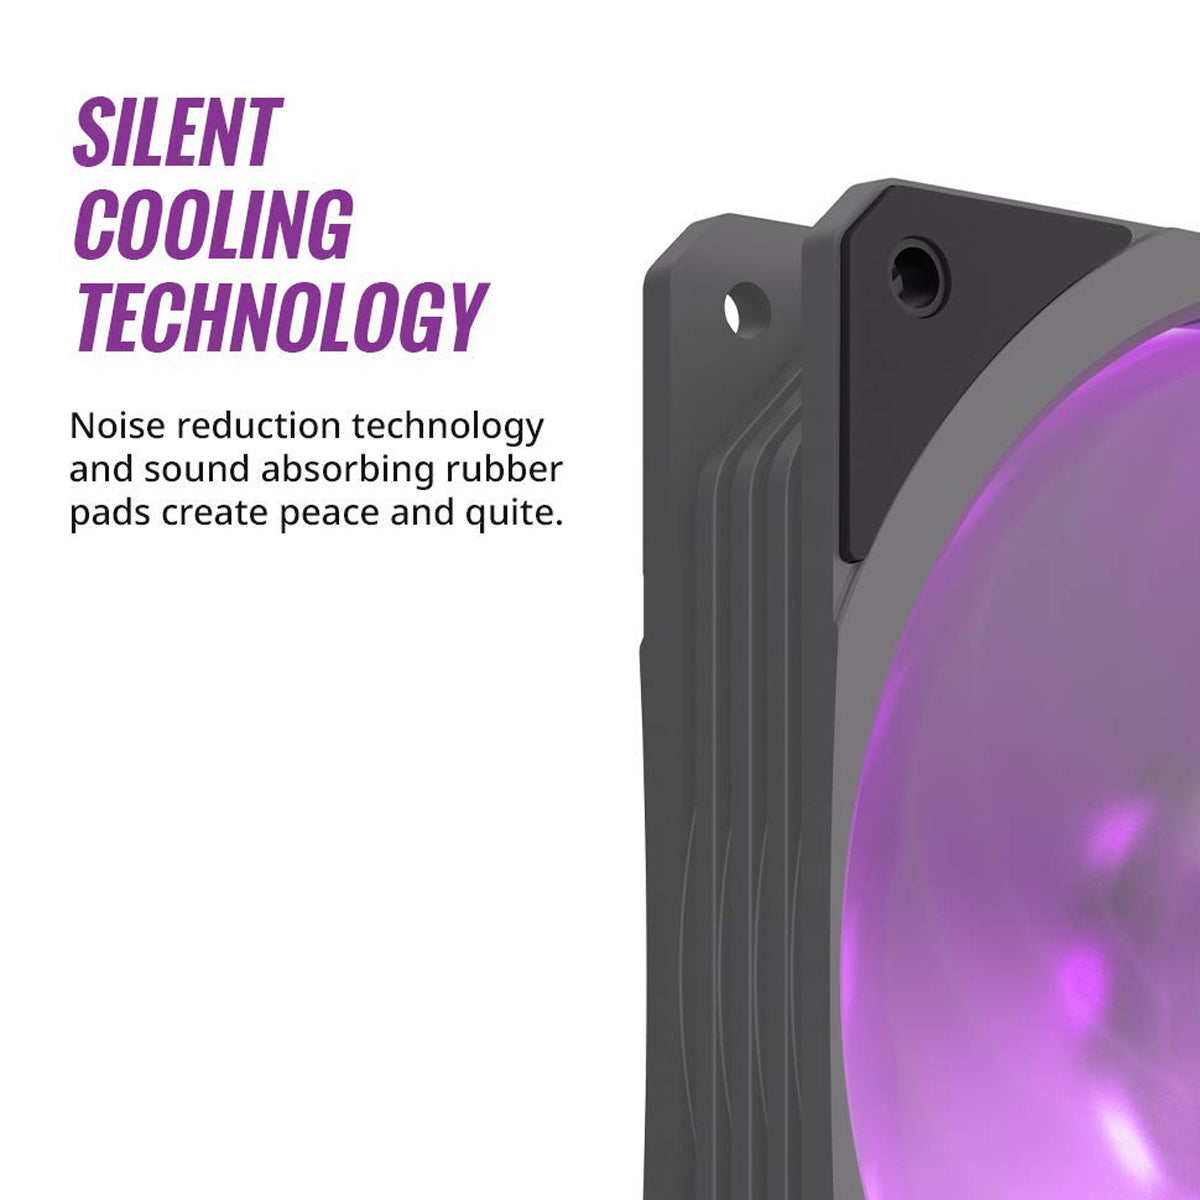 Cooler Master MasterFan SF120R RGB 120mm Case Fan with Silent Cooling Technology and Jam Protection